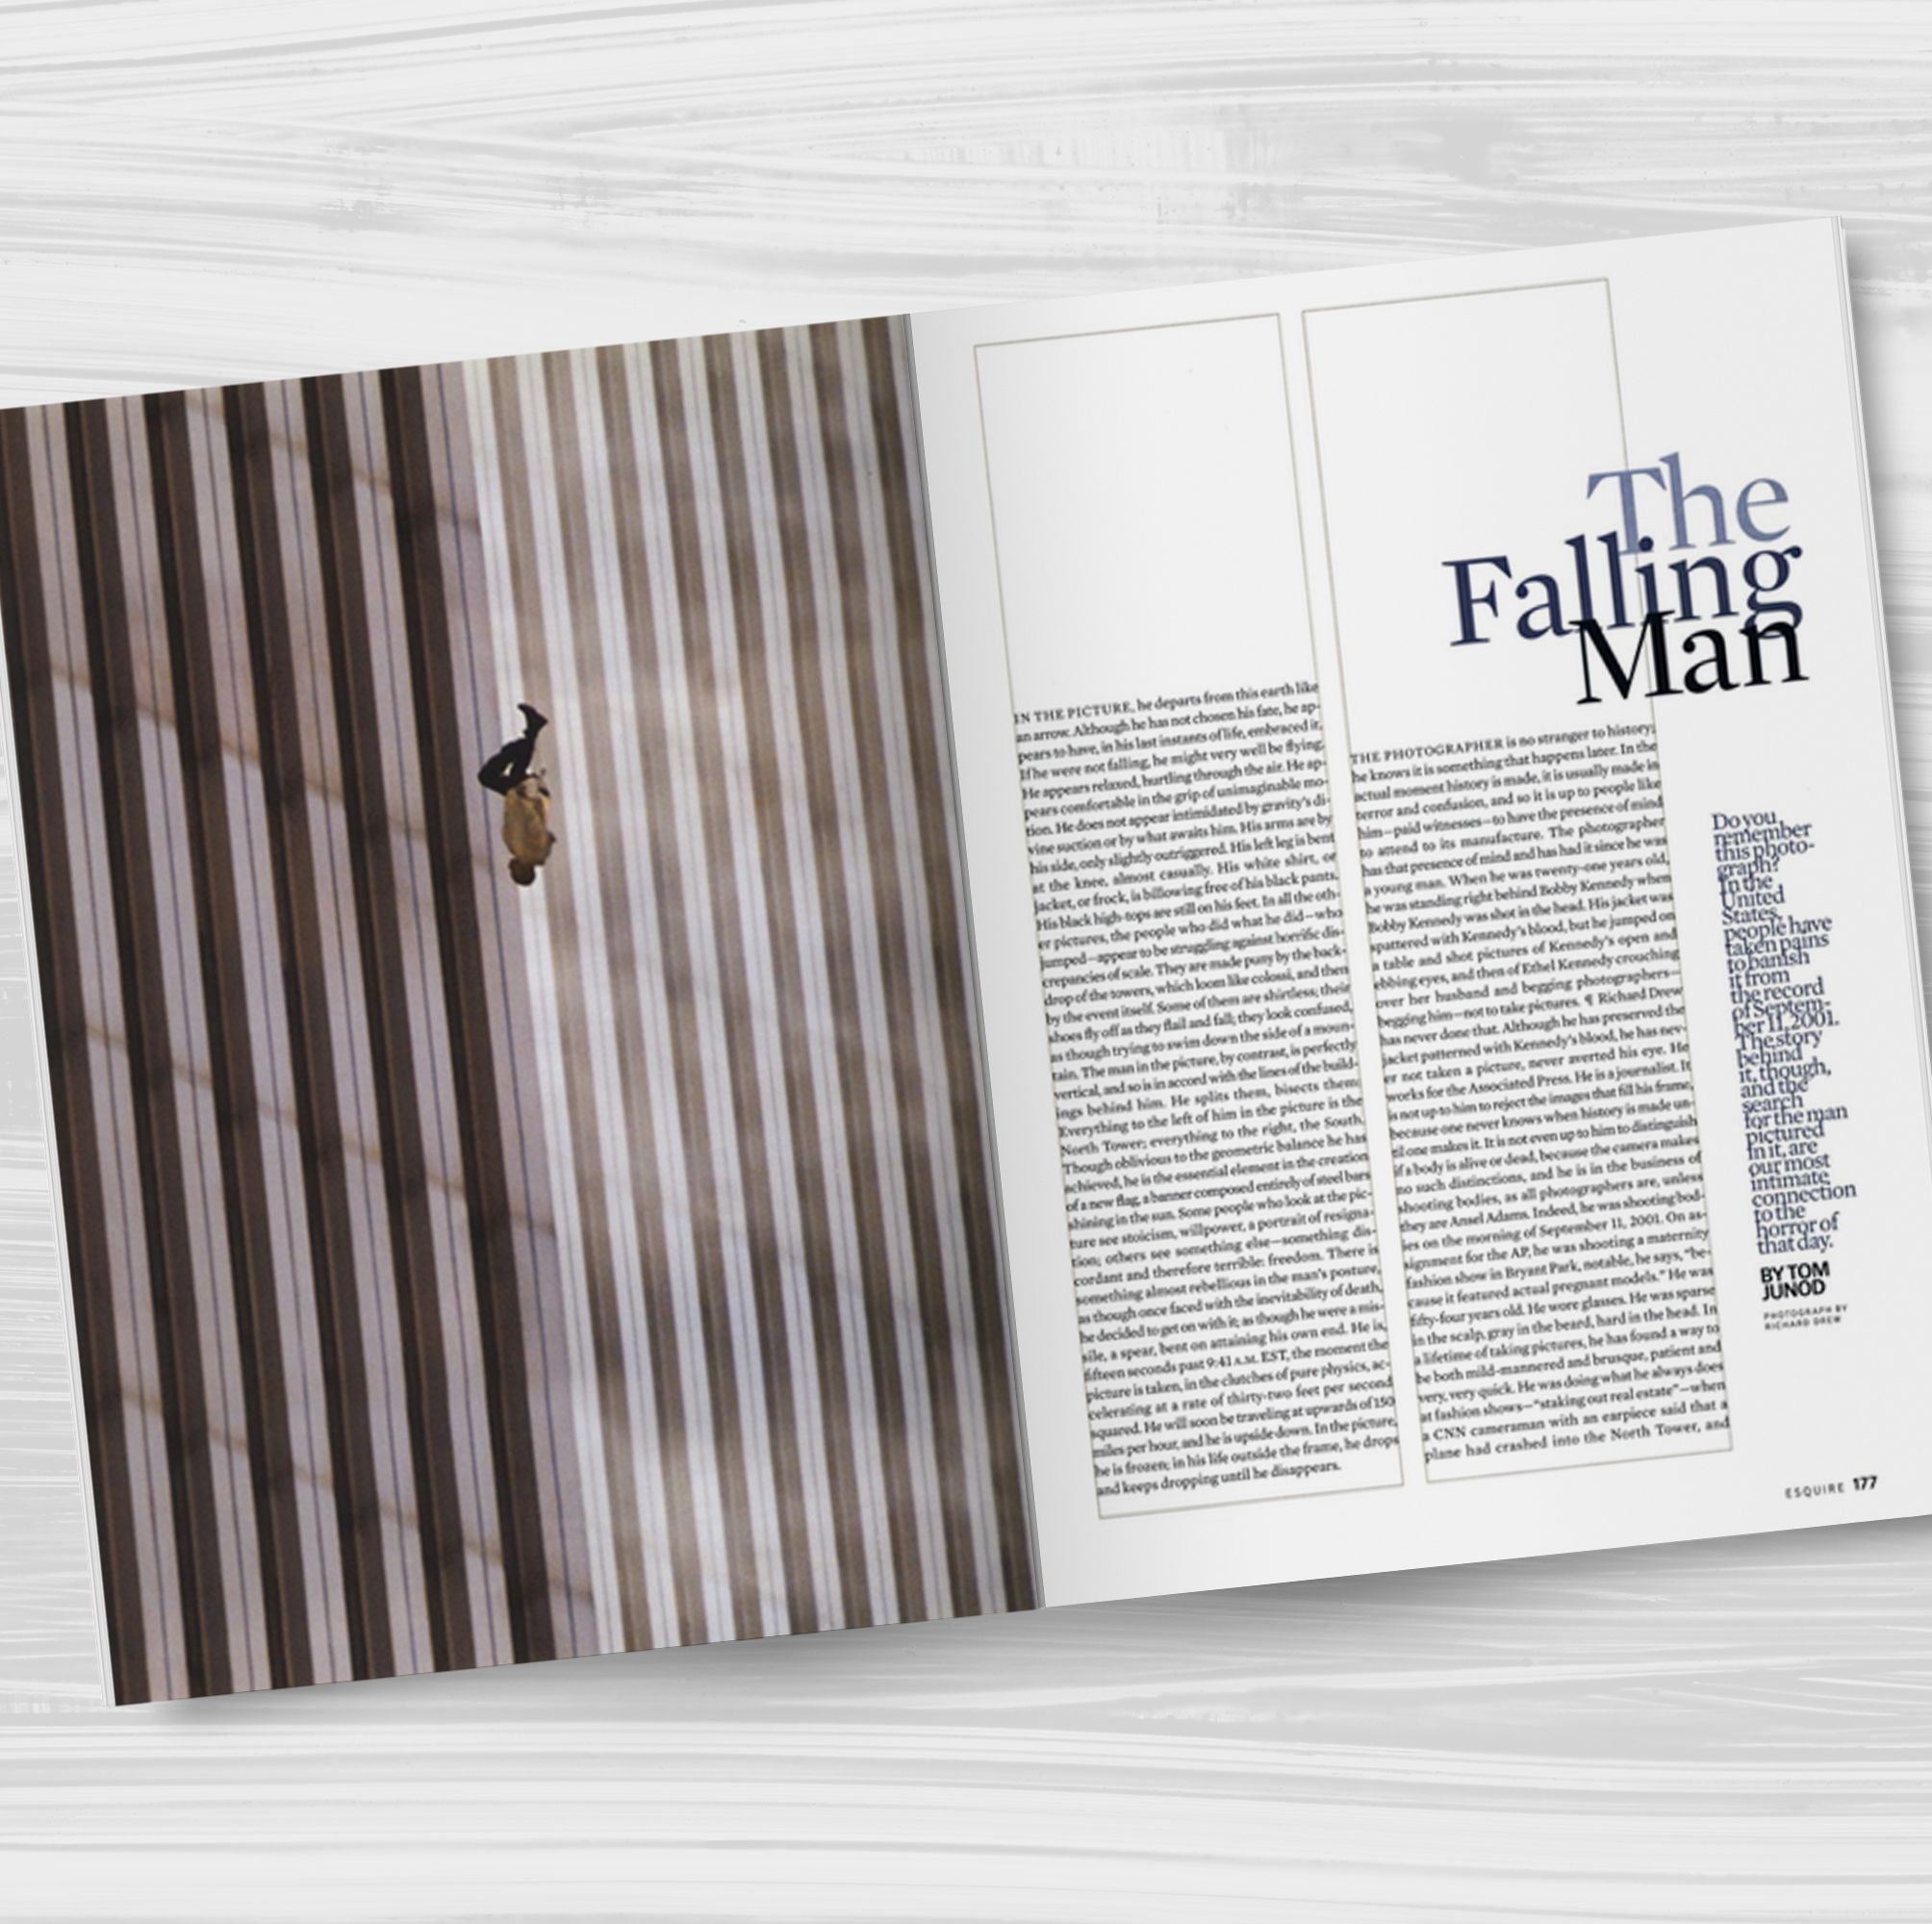 'It Became Spiritual': The Making of Esquire's 'The Falling Man'